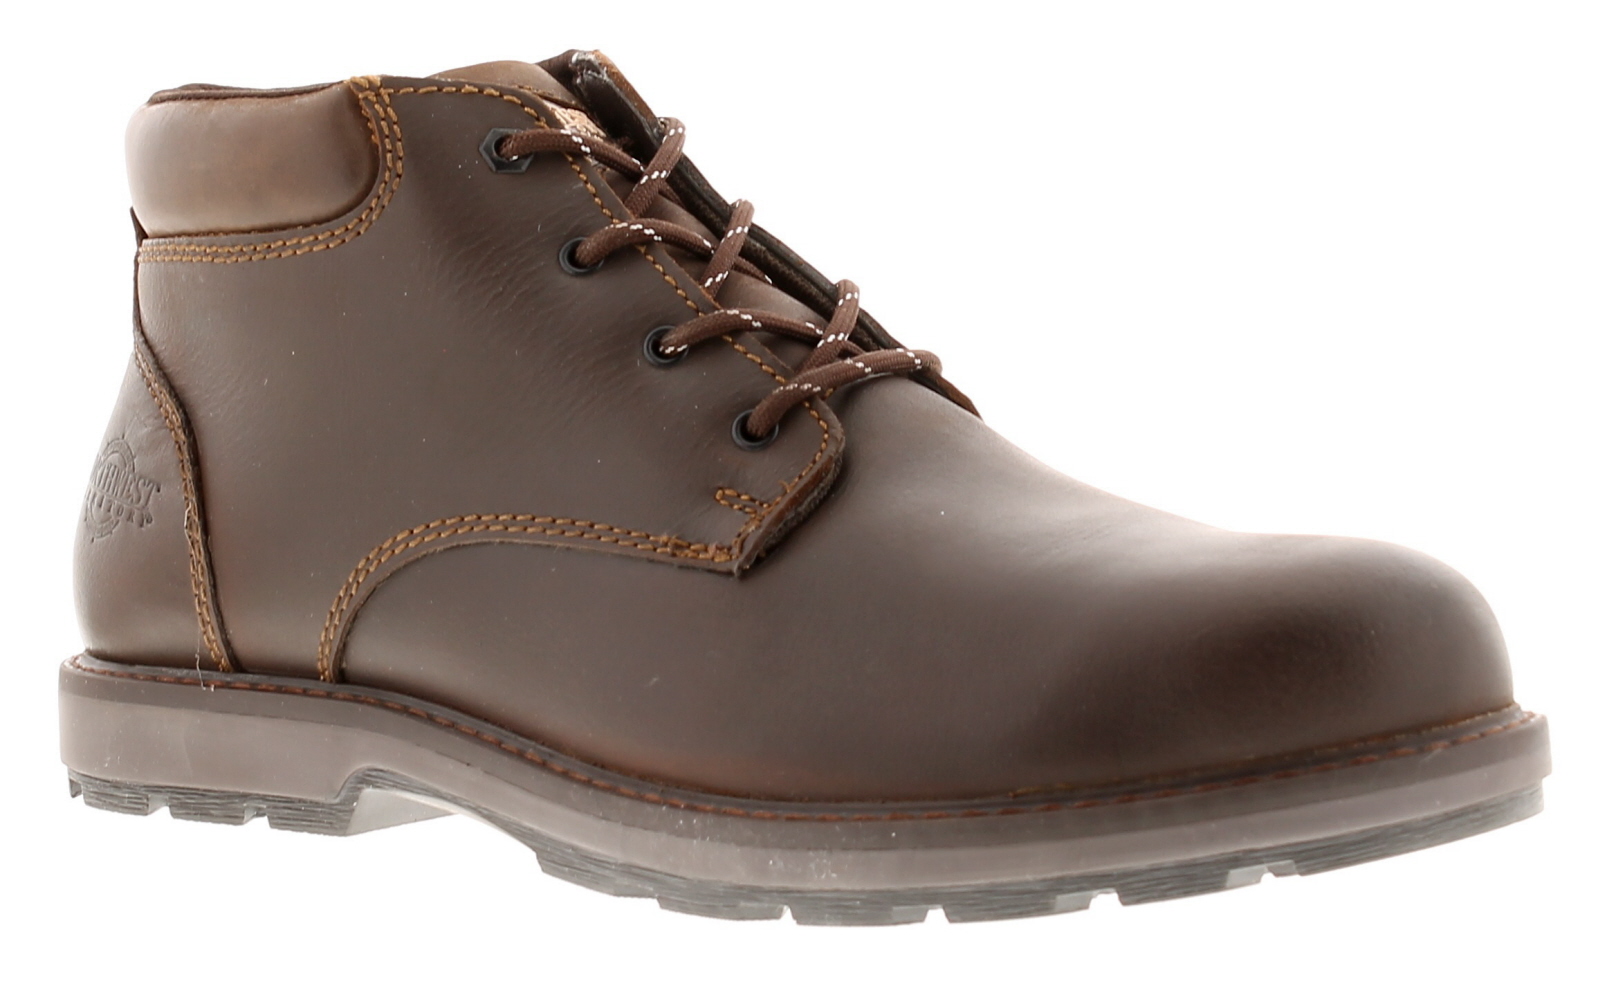 Northwest Territory Mens Boots Desert Sachs Leather Lace Up brown